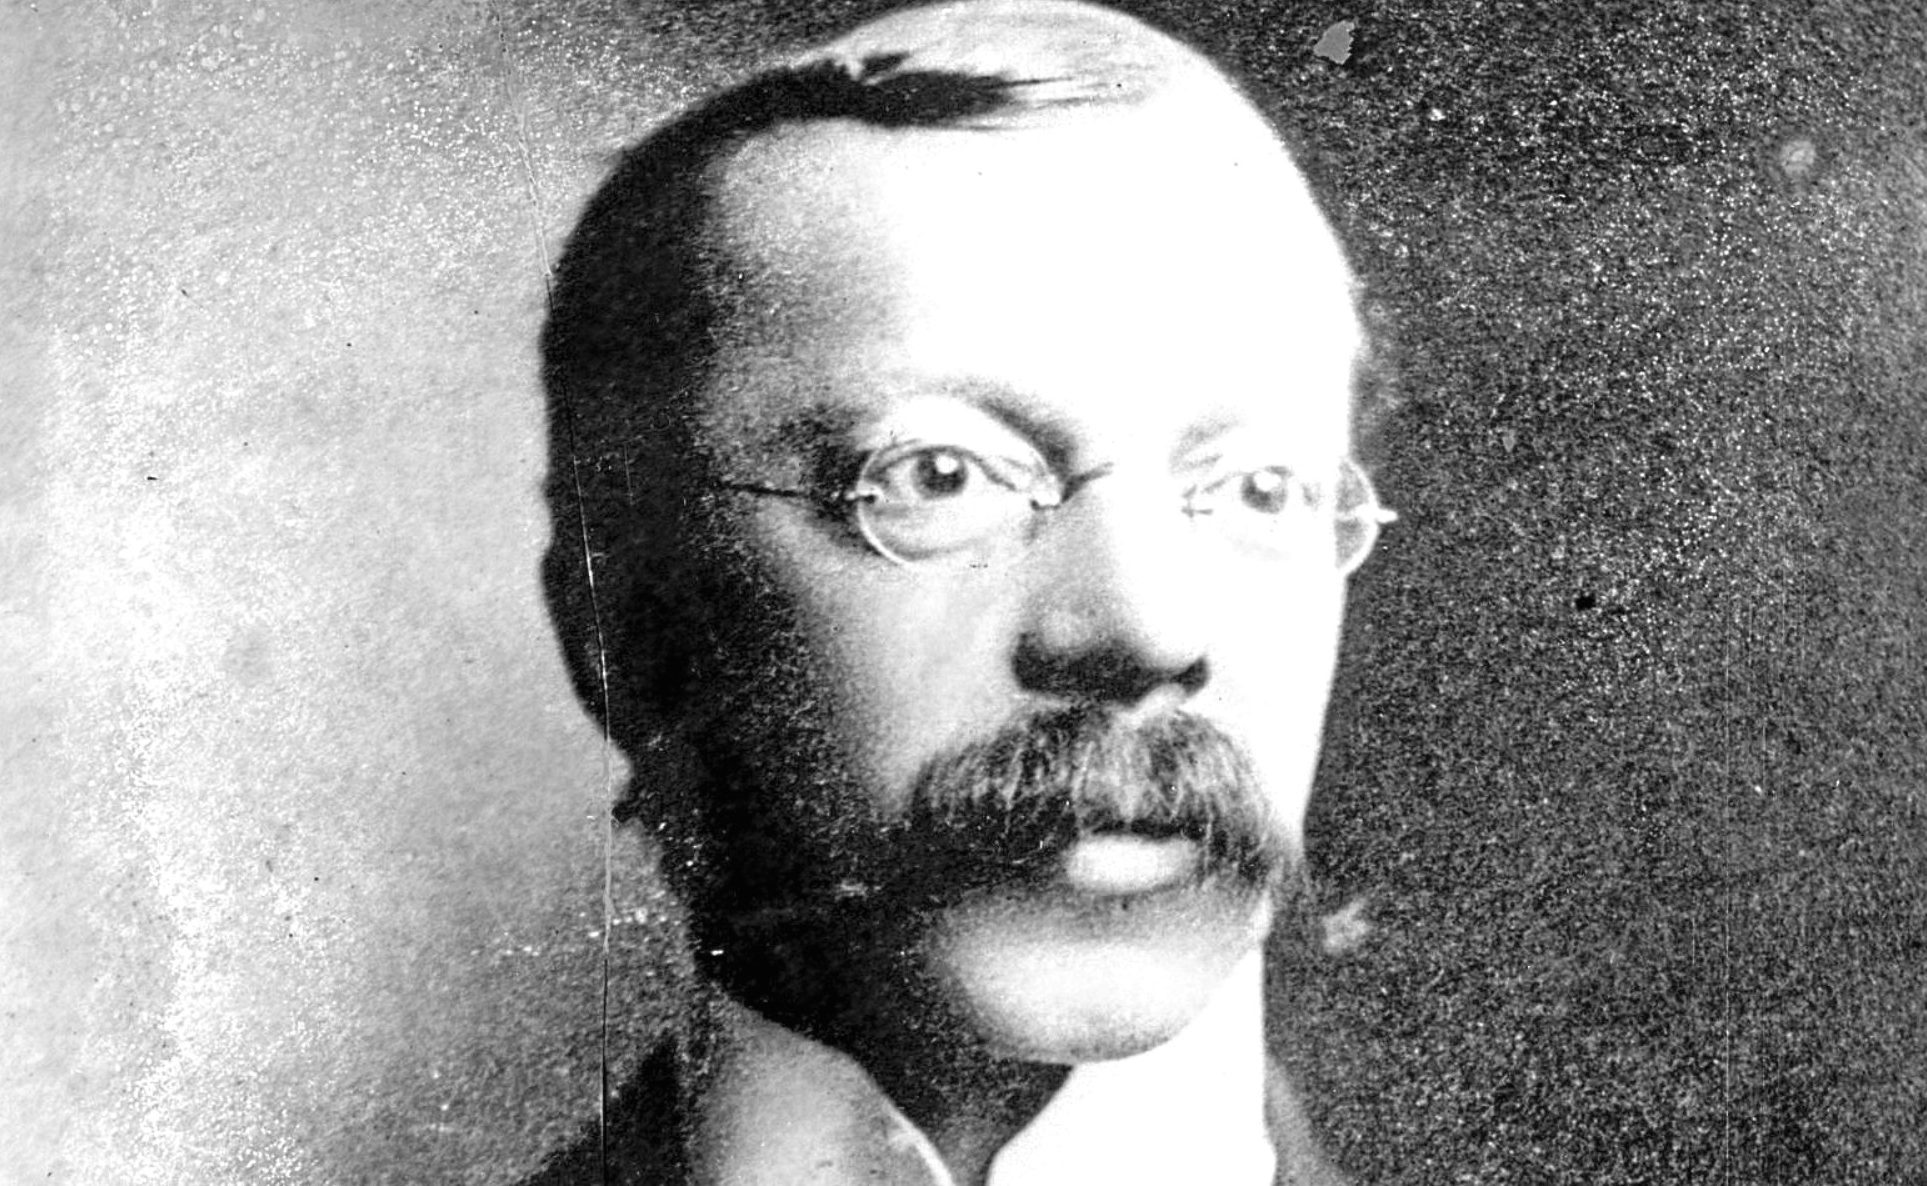 Dr Hawley Harvey Crippen (1862 - 1910), a US-born physician who poisoned his wife and buried her in the cellar of their London home (Edward Gooch/Getty Images)